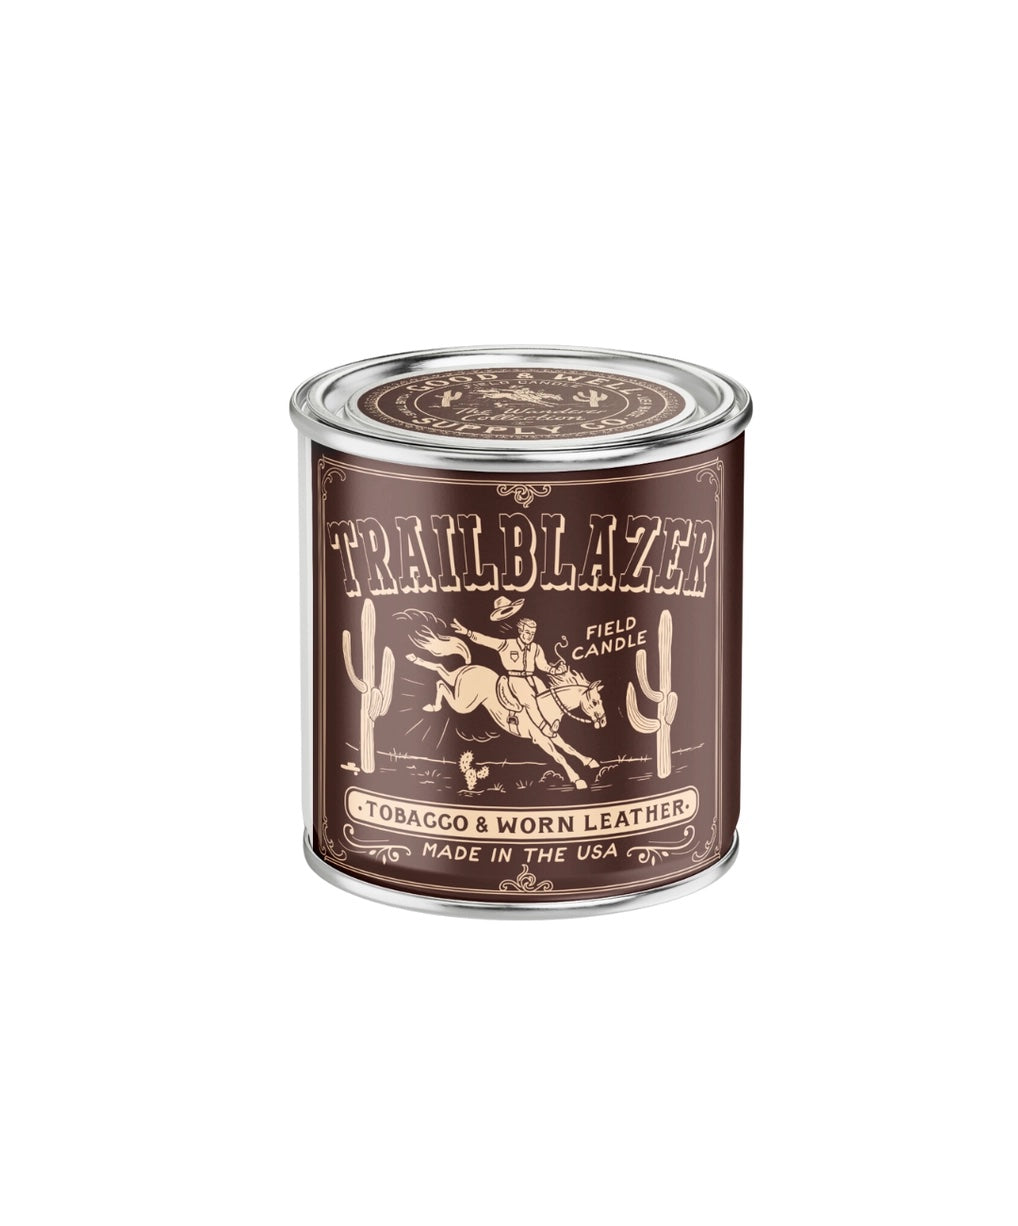 Trailblazer Field Candle | Tobacco & Worn Leather Candle | Good and Well Supply Co.